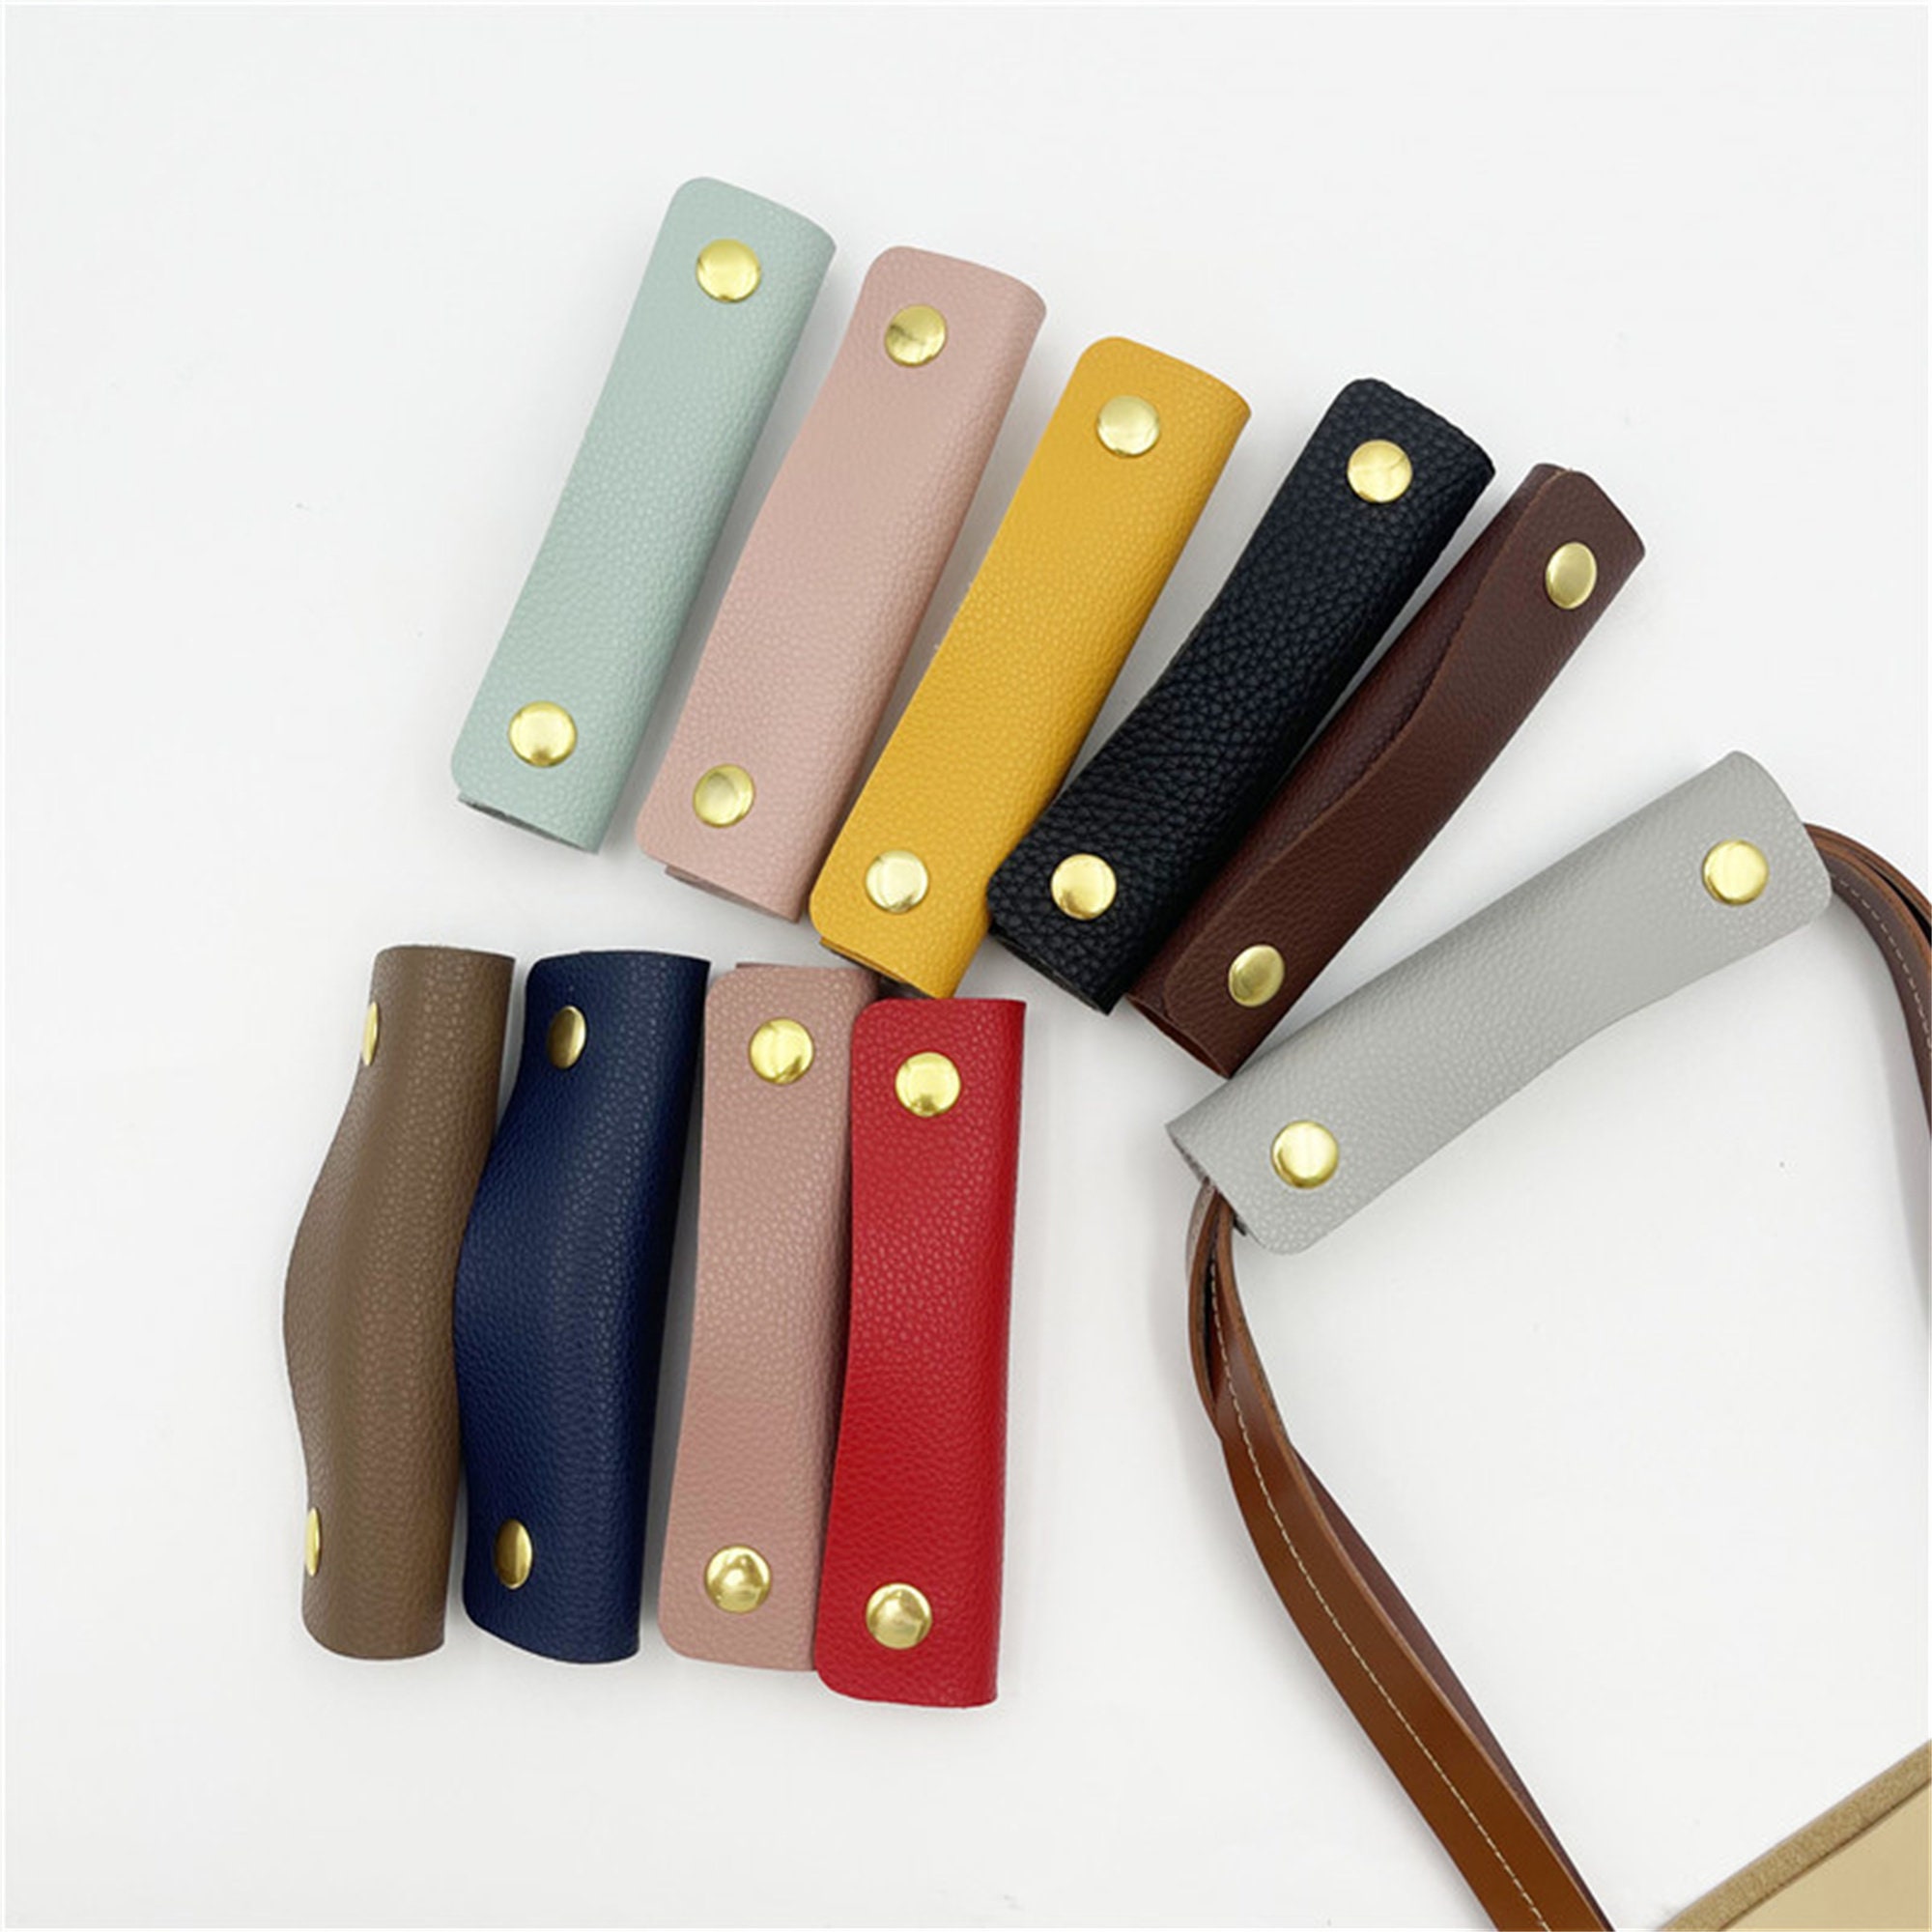 Leather Bag Handle Anti-strap Suitcase Grip Protective PU Leather Handle  Wrap